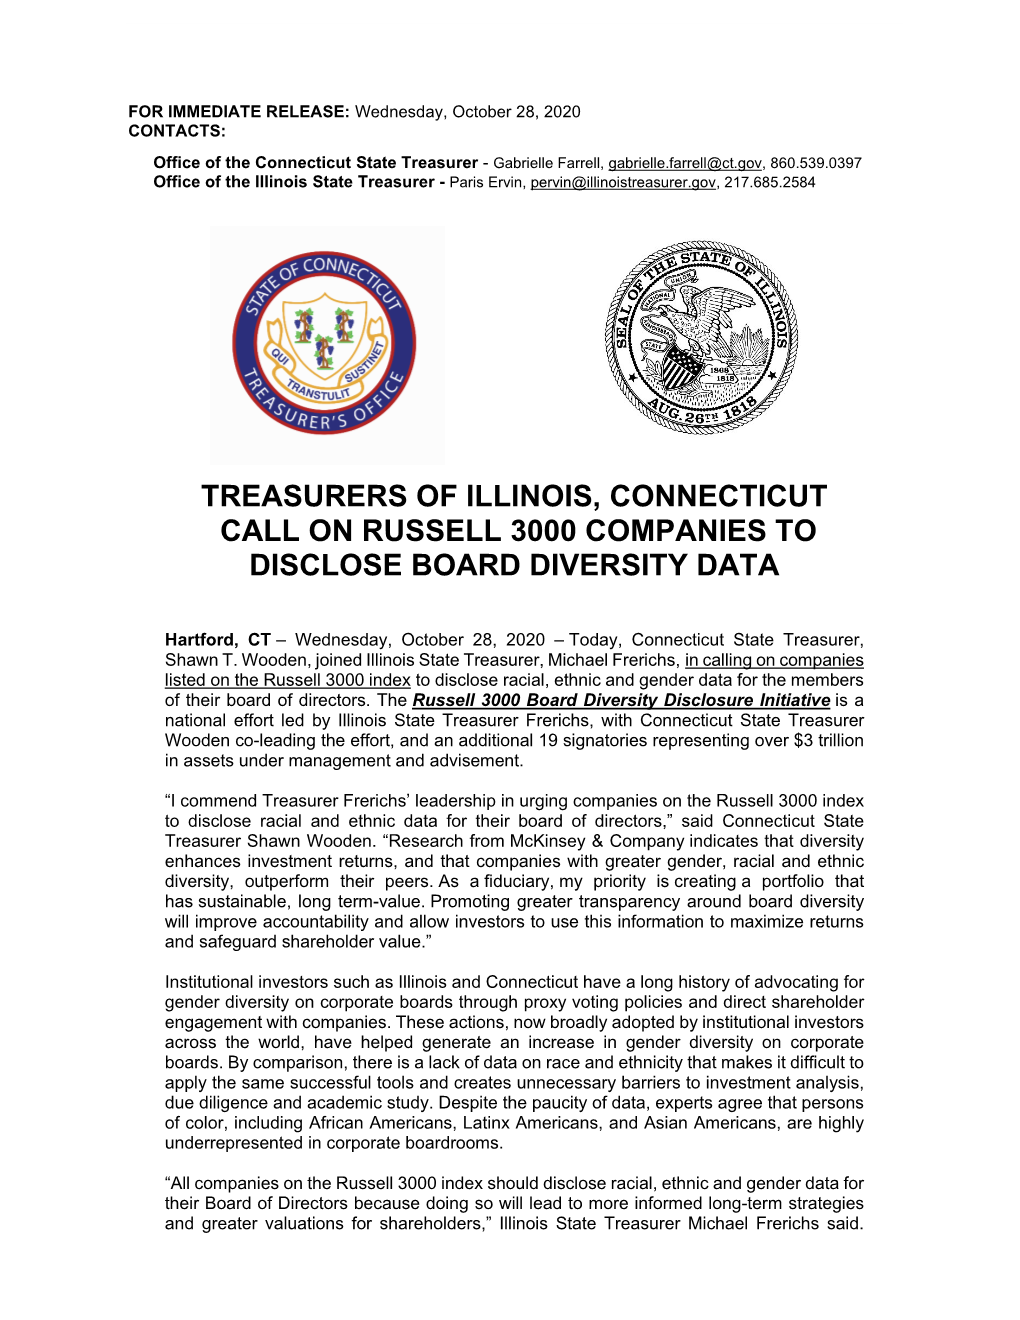 Treasurers of Illinois, Connecticut Call on Russell 3000 Companies to Disclose Board Diversity Data